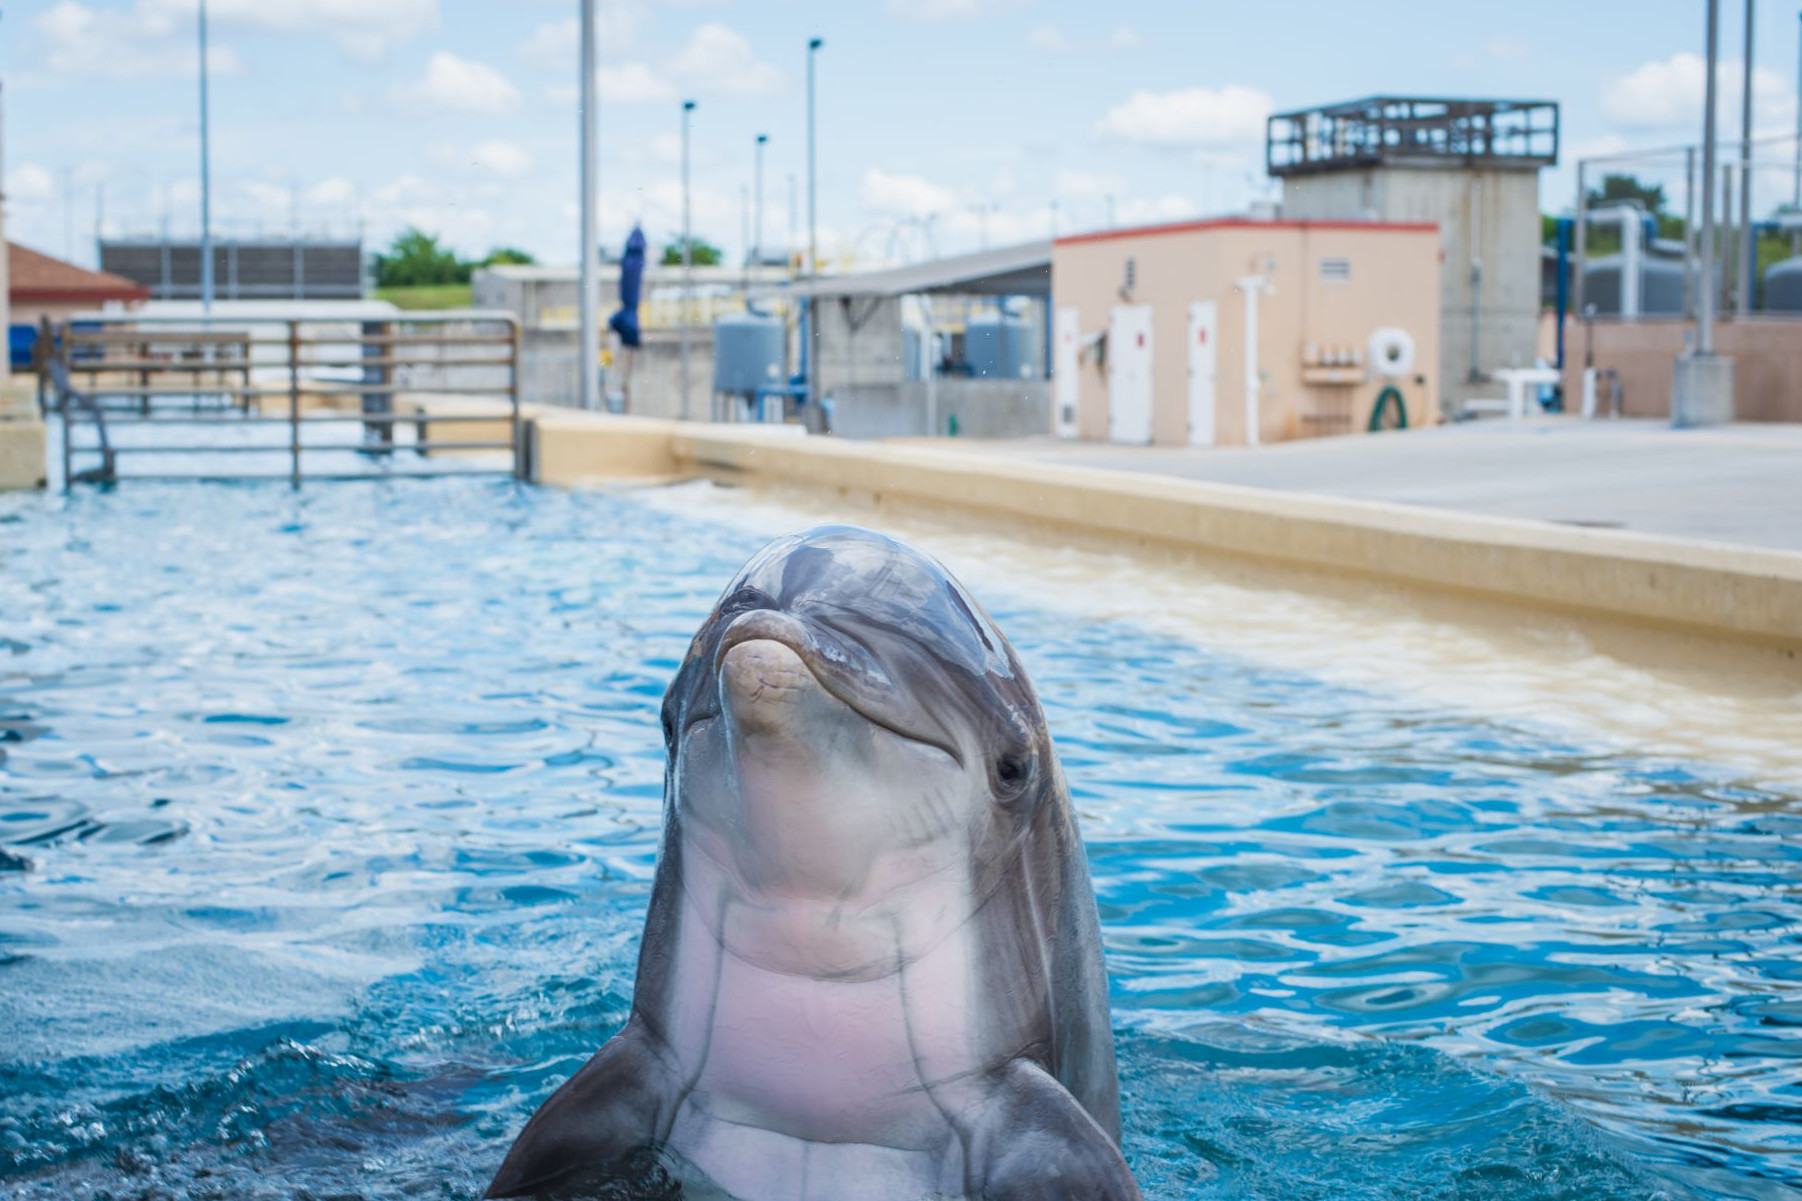 A dolphin in captivity - Wildlife. Not entertainers - World Animal Protection